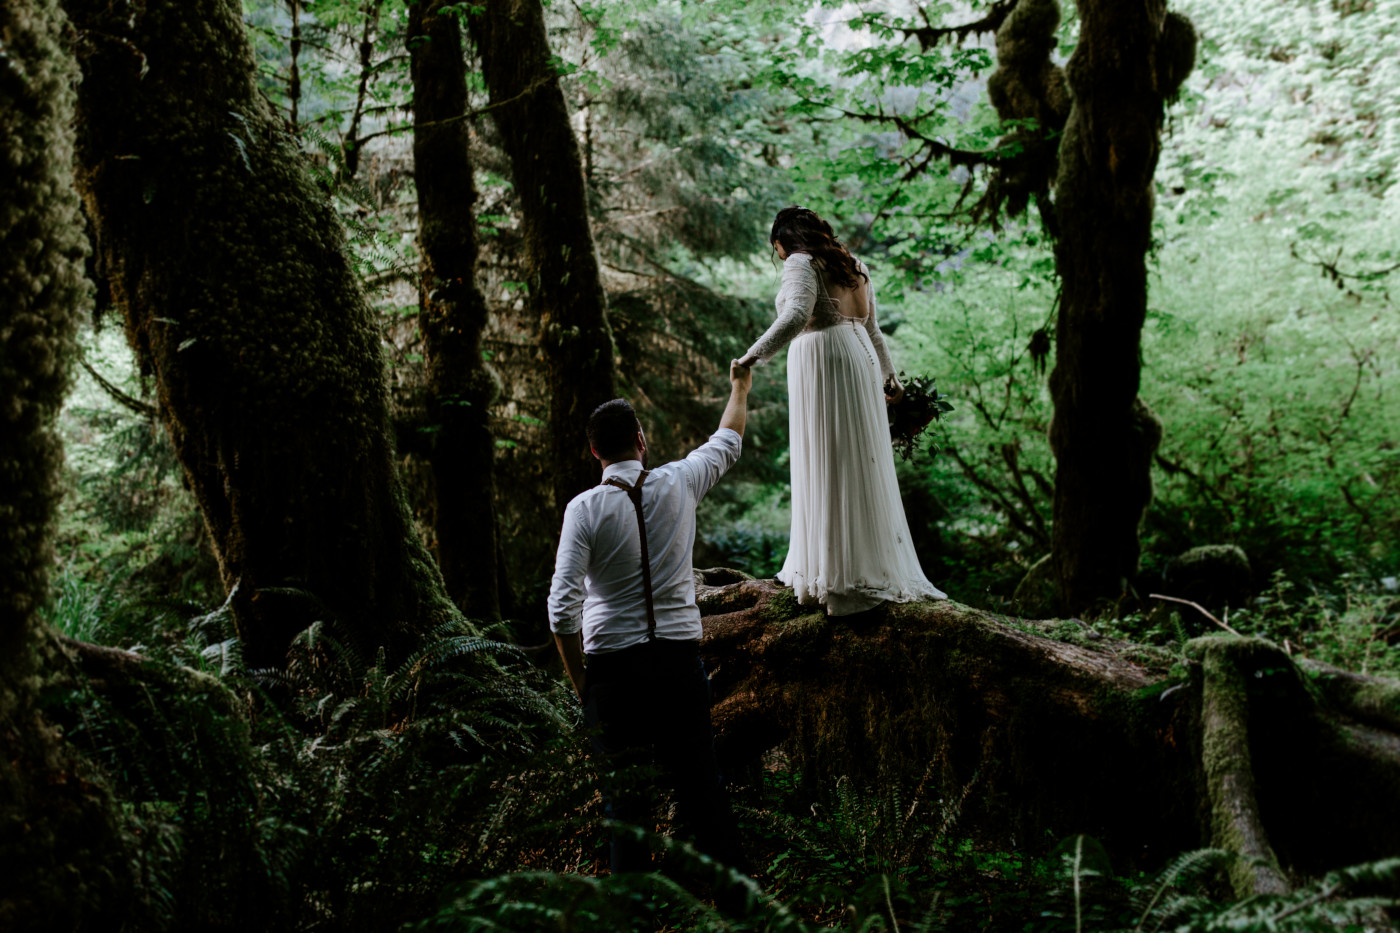 Jack helps Brooke walk across a log. Elopement photography at Olympic National Park by Sienna Plus Josh.